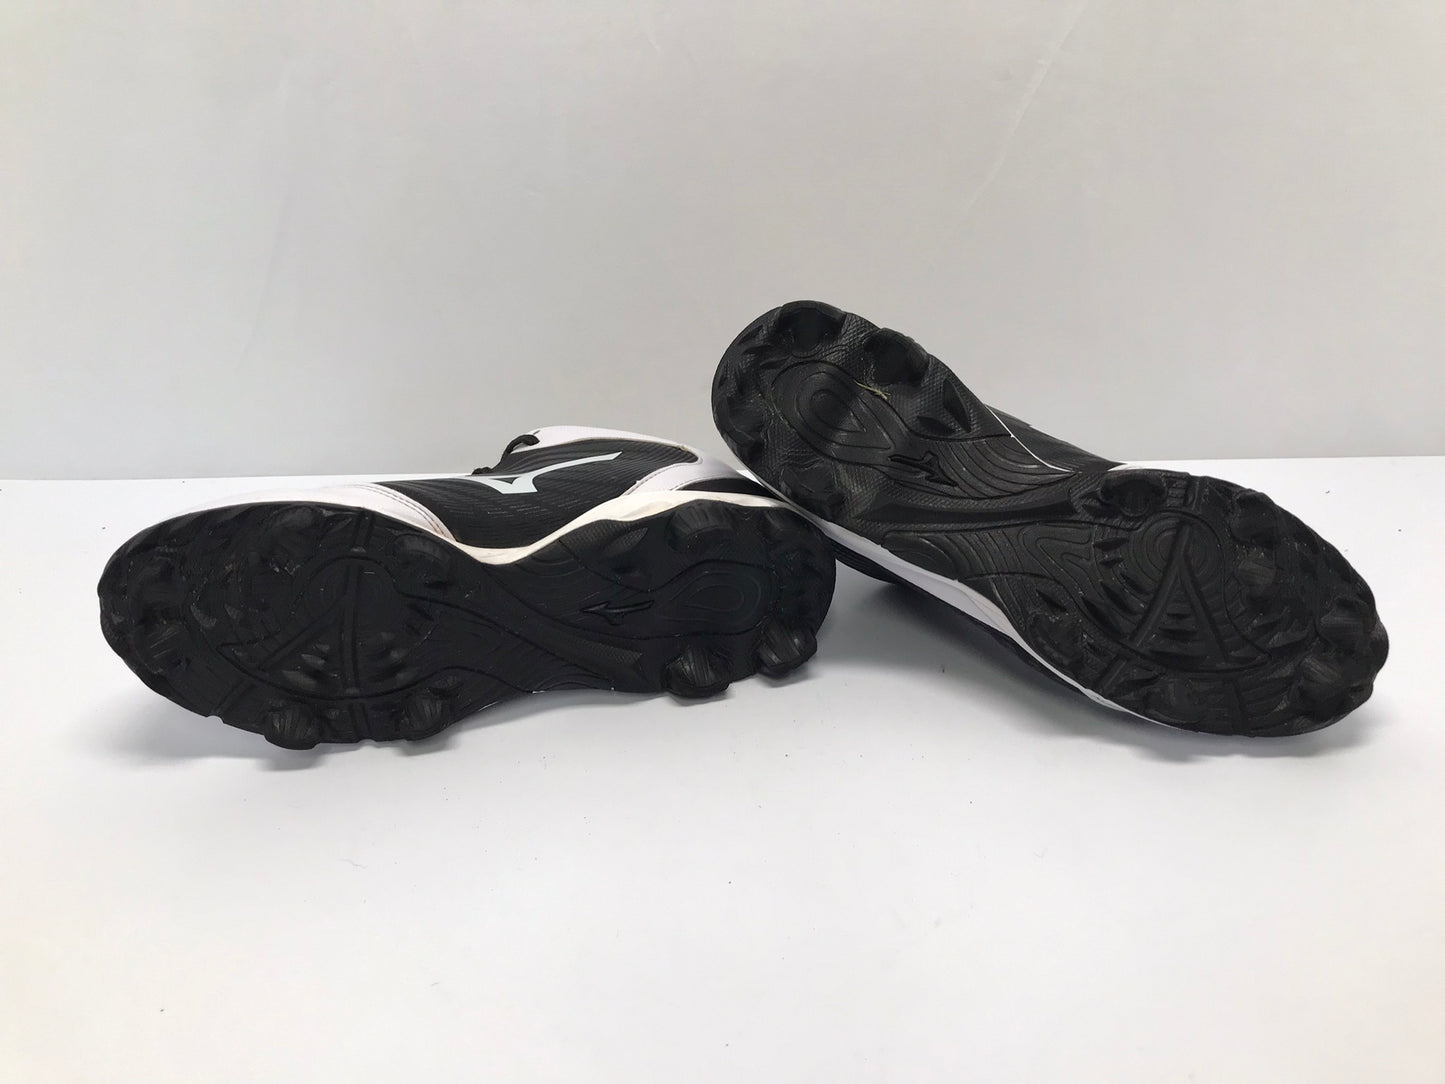 Baseball Shoes Cleats Ladies Size 9 Spike Black White As New